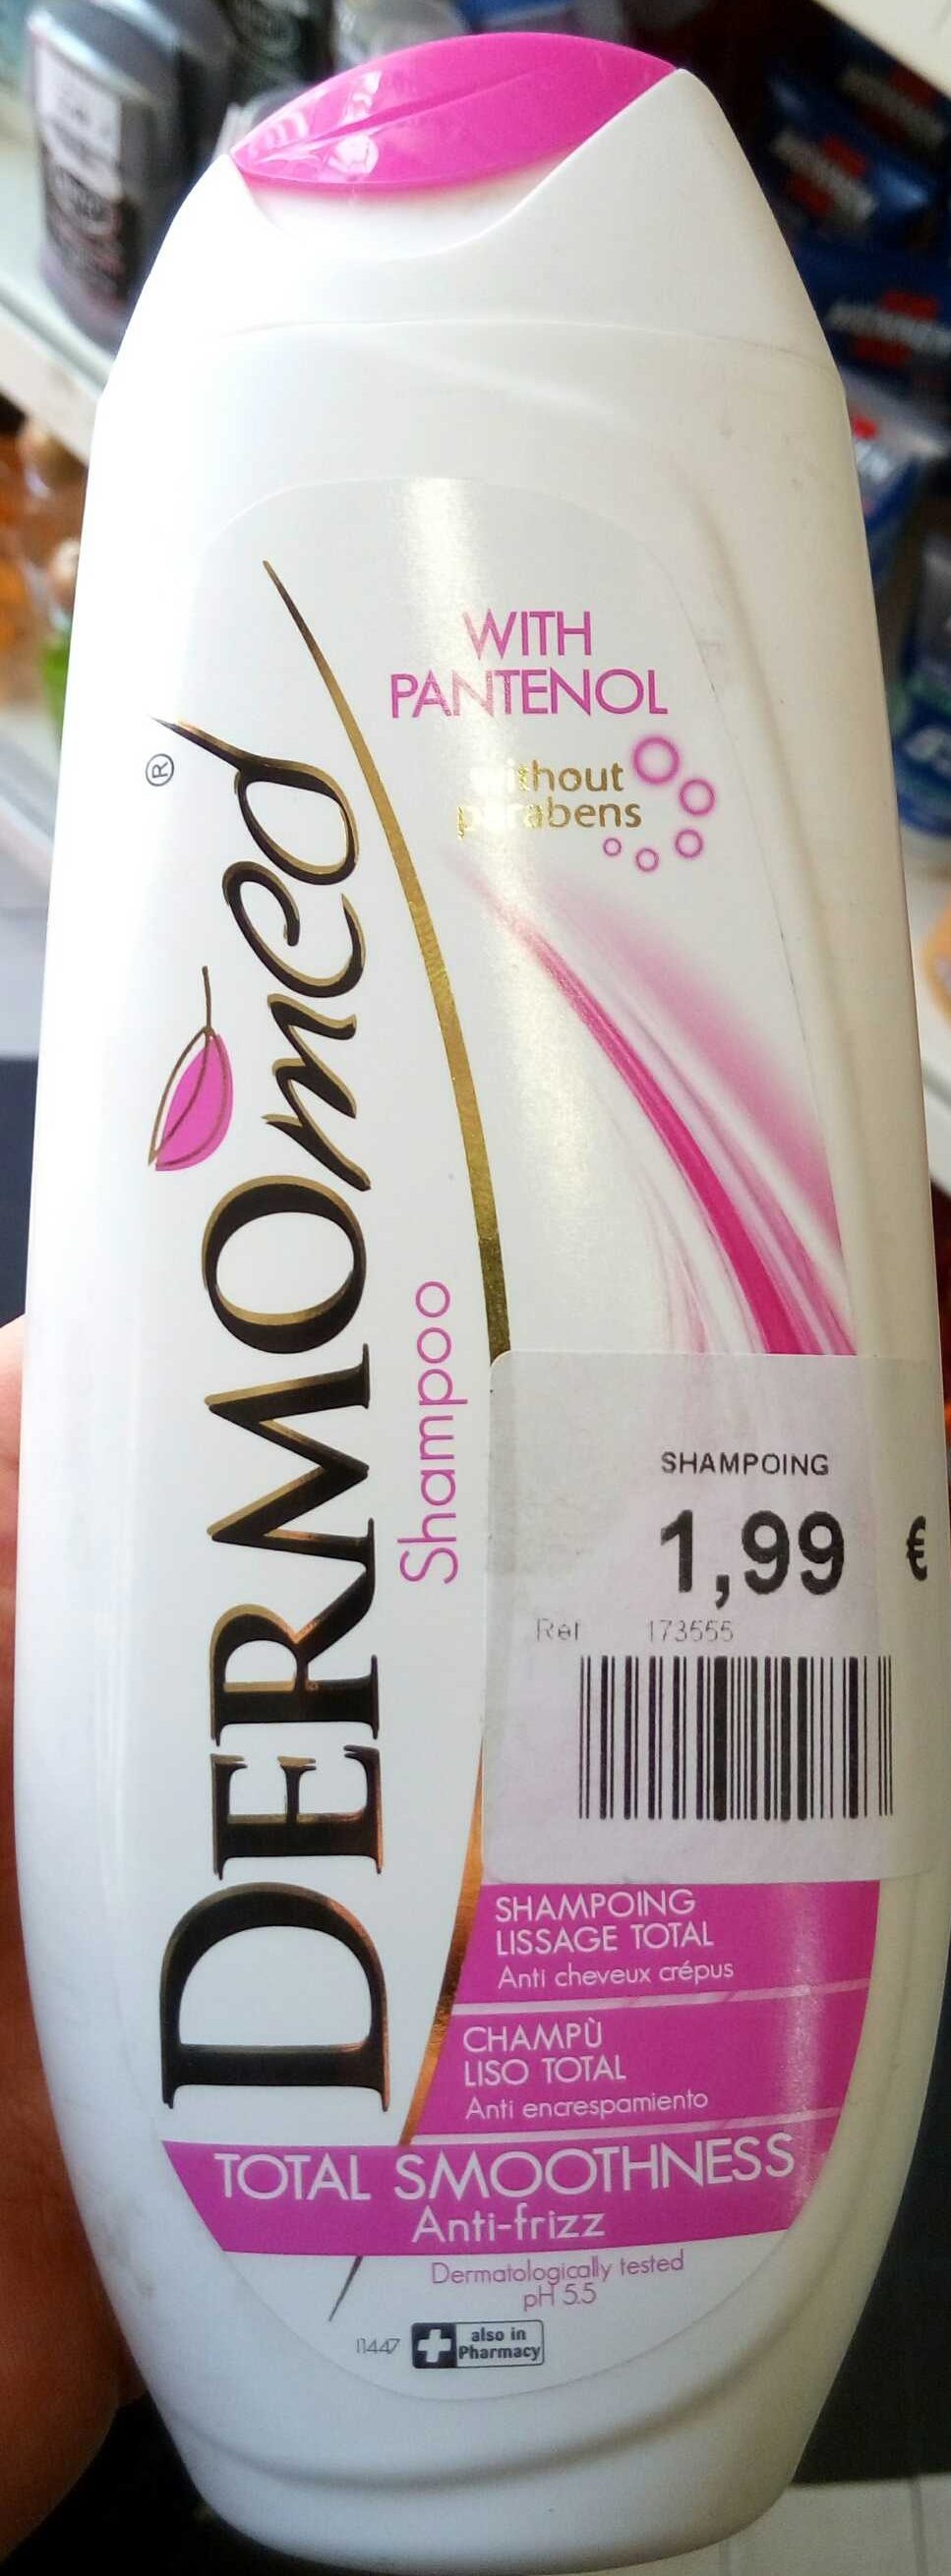 Shampoing Lissage Total - 製品 - fr